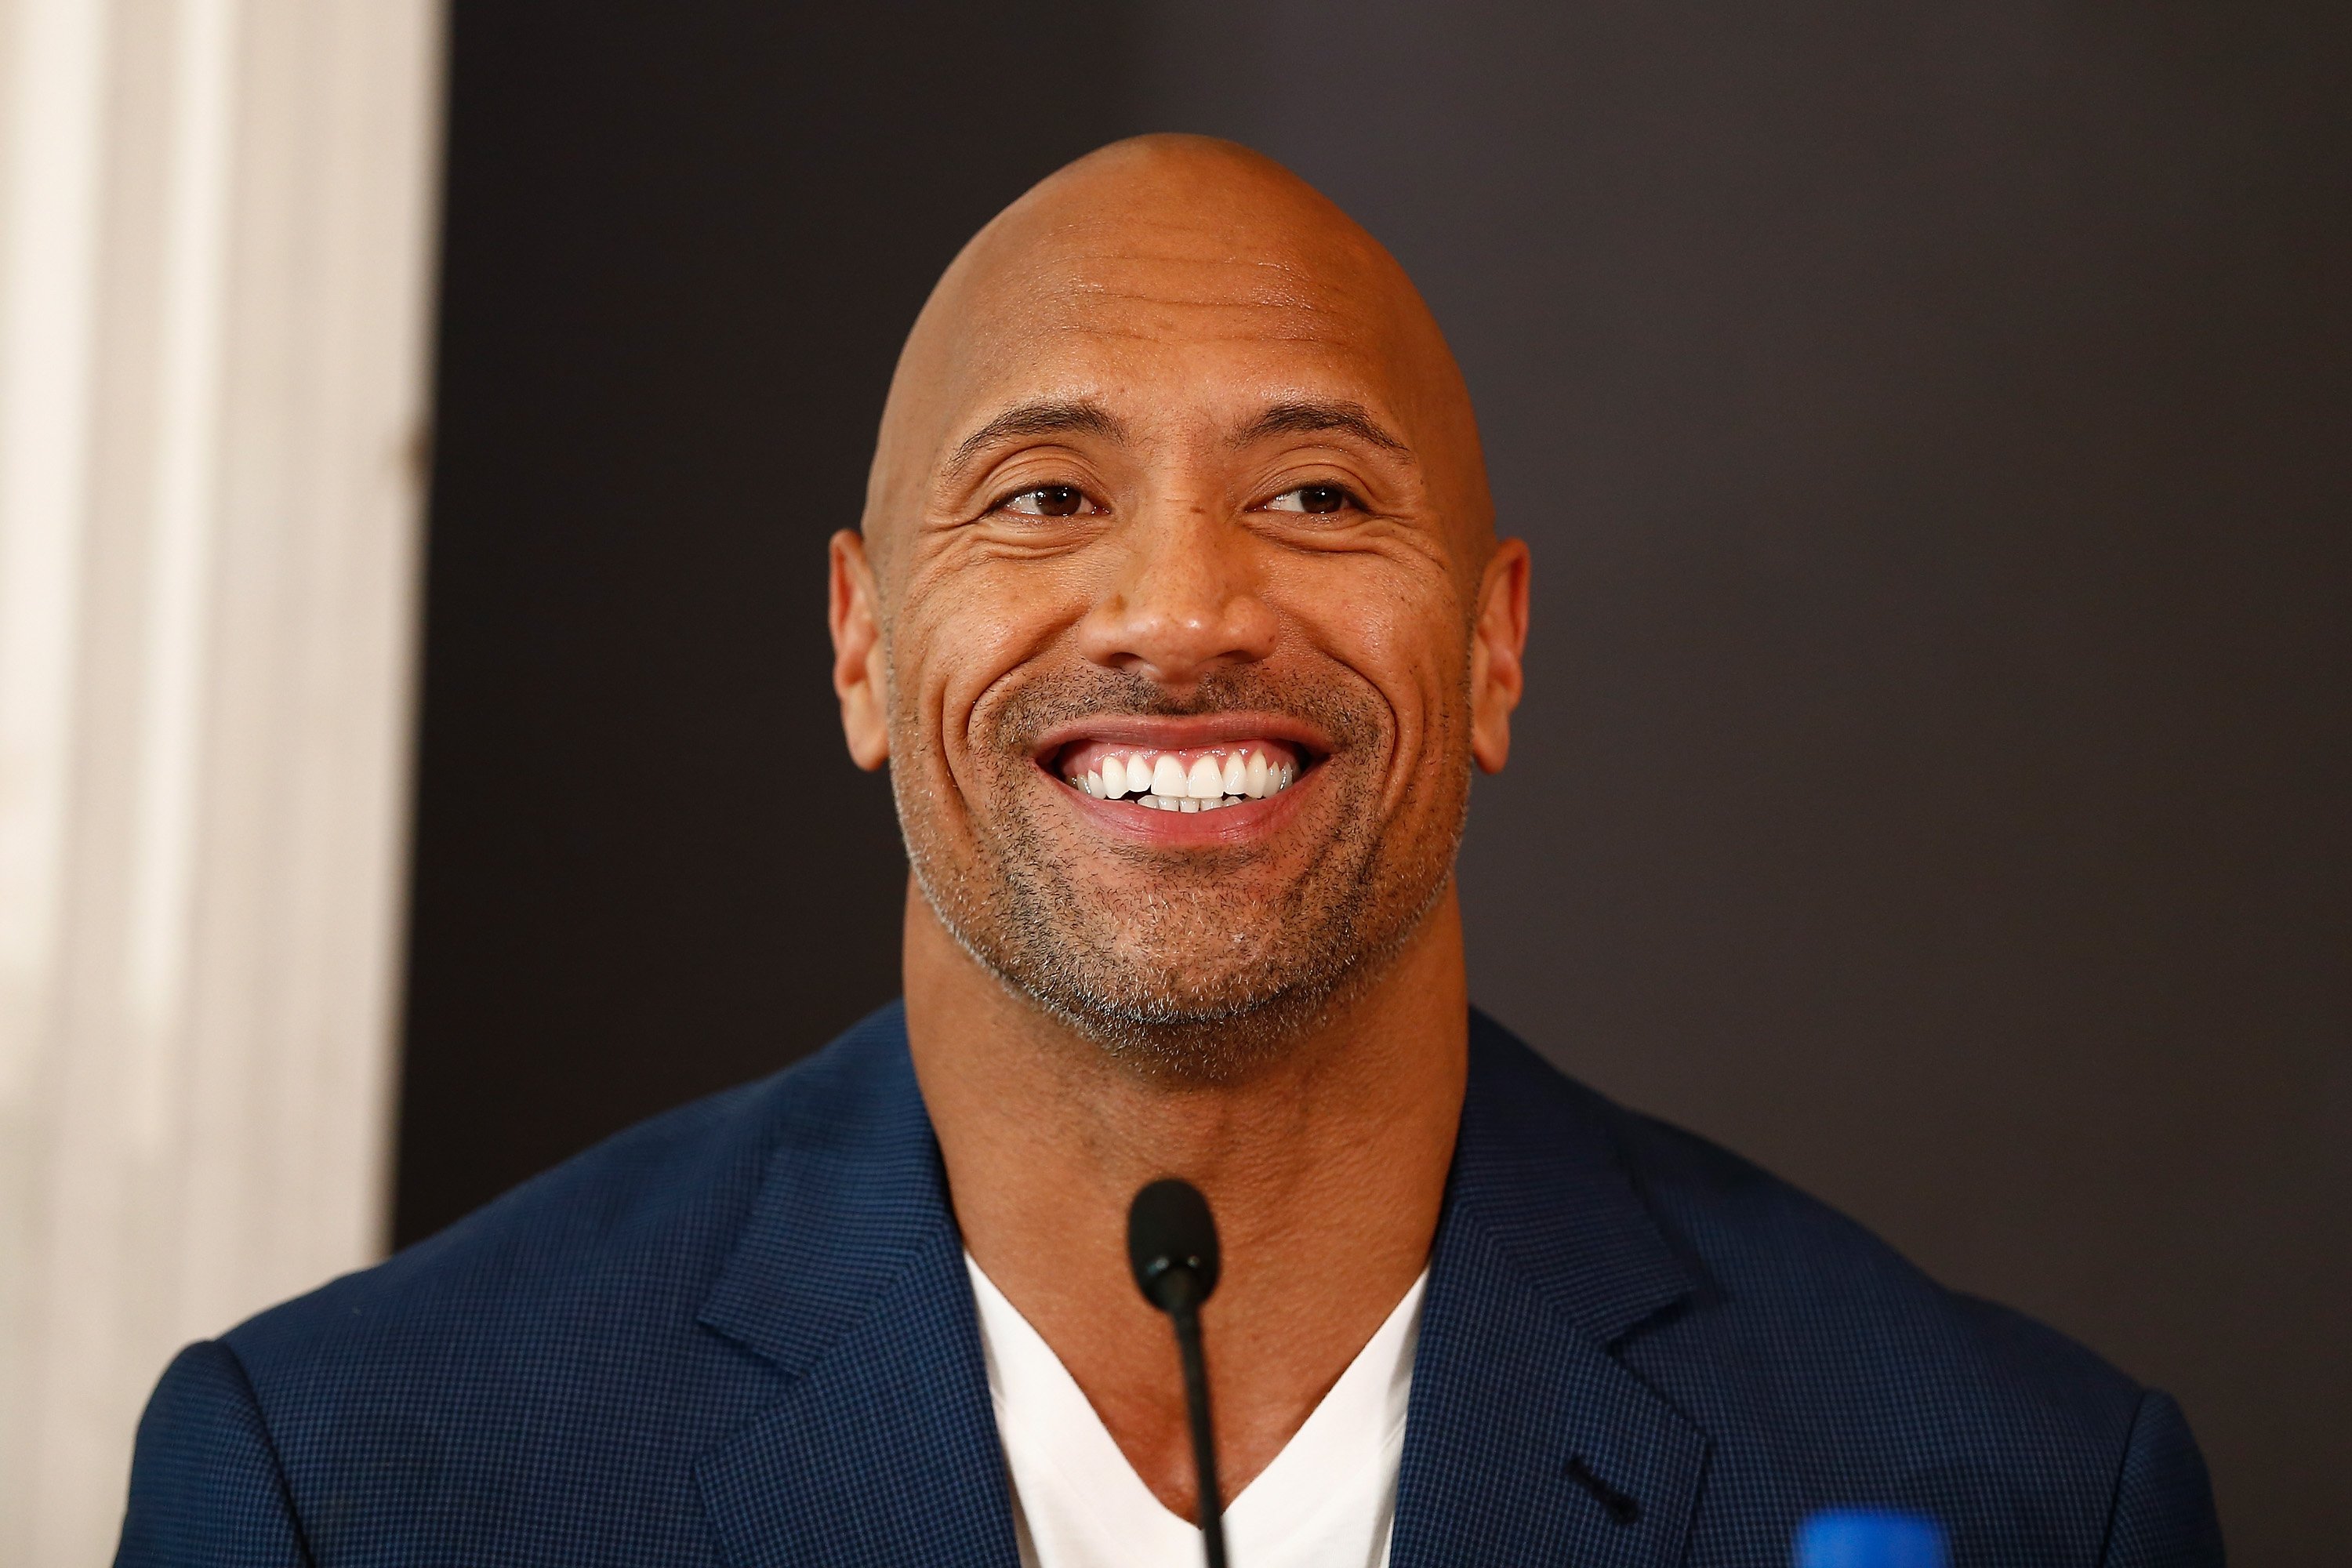 Dwayne Johnson pictured at the press conference of Paramount Pictures "HERCULES," 204, Berlin, Germany. | Photo: Getty Images